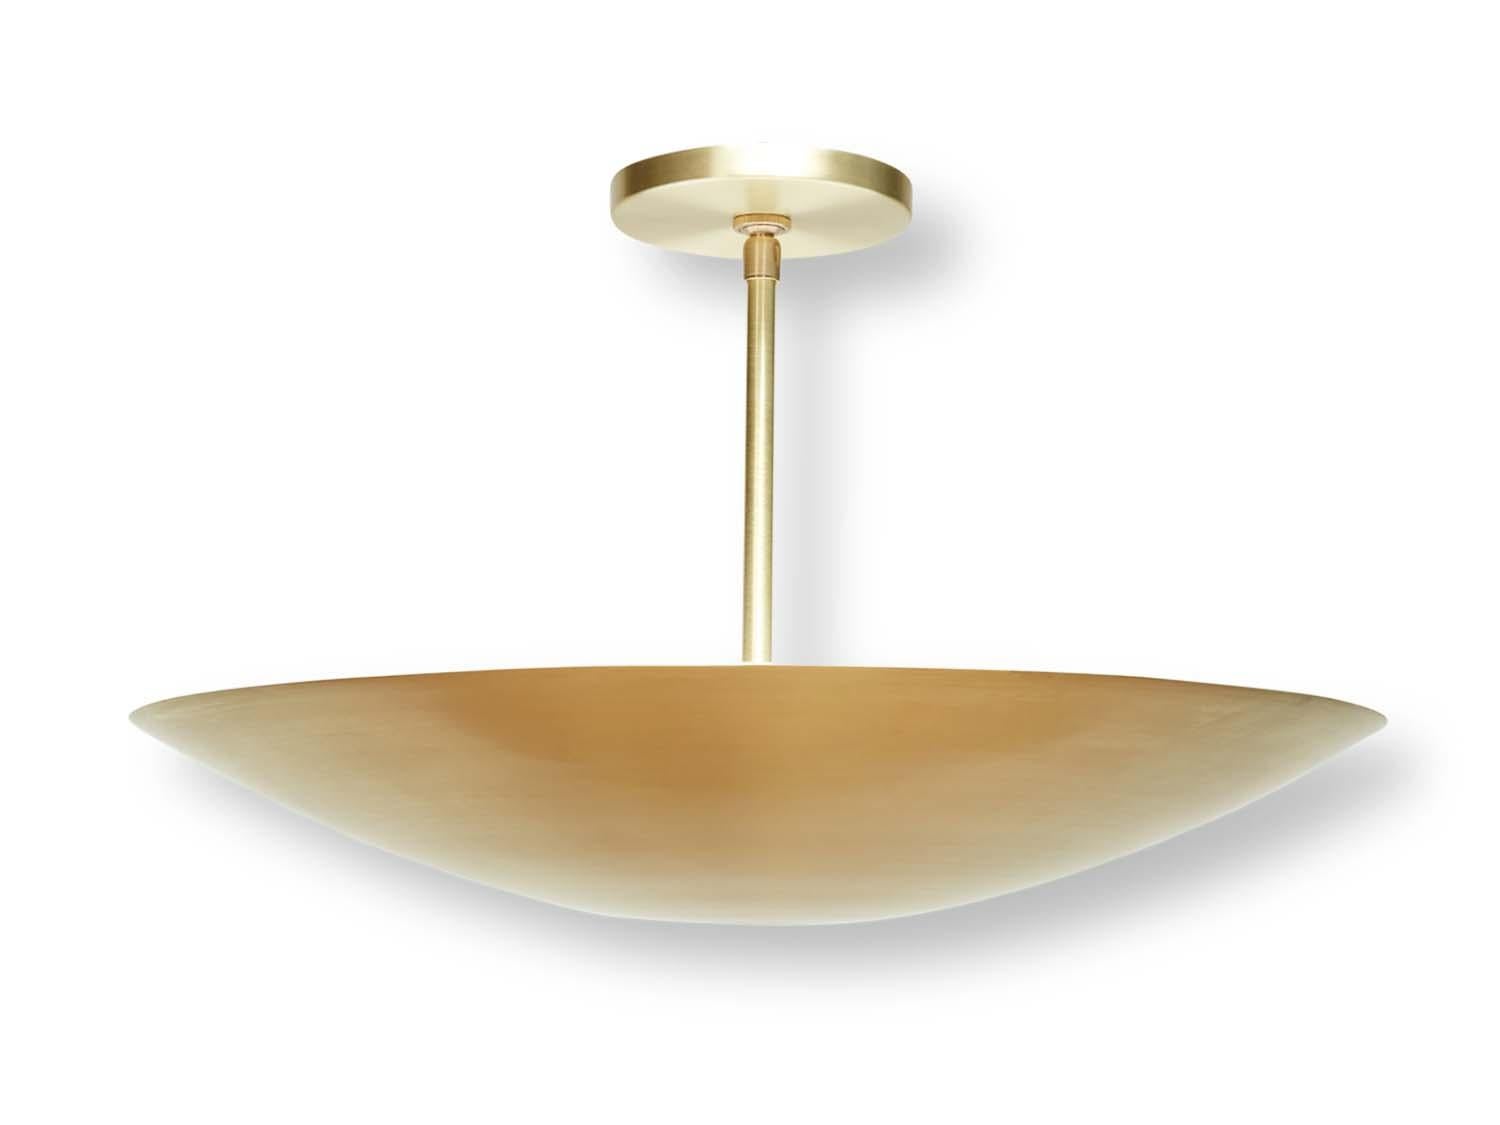 The Alta brass dome features a spun metal shade with a brass canopy and rod. The shade is available in brass or powdercoated metal finishes. 

The Lawson-Fenning Collection is designed and handmade in Los Angeles, California. Reach out to discover